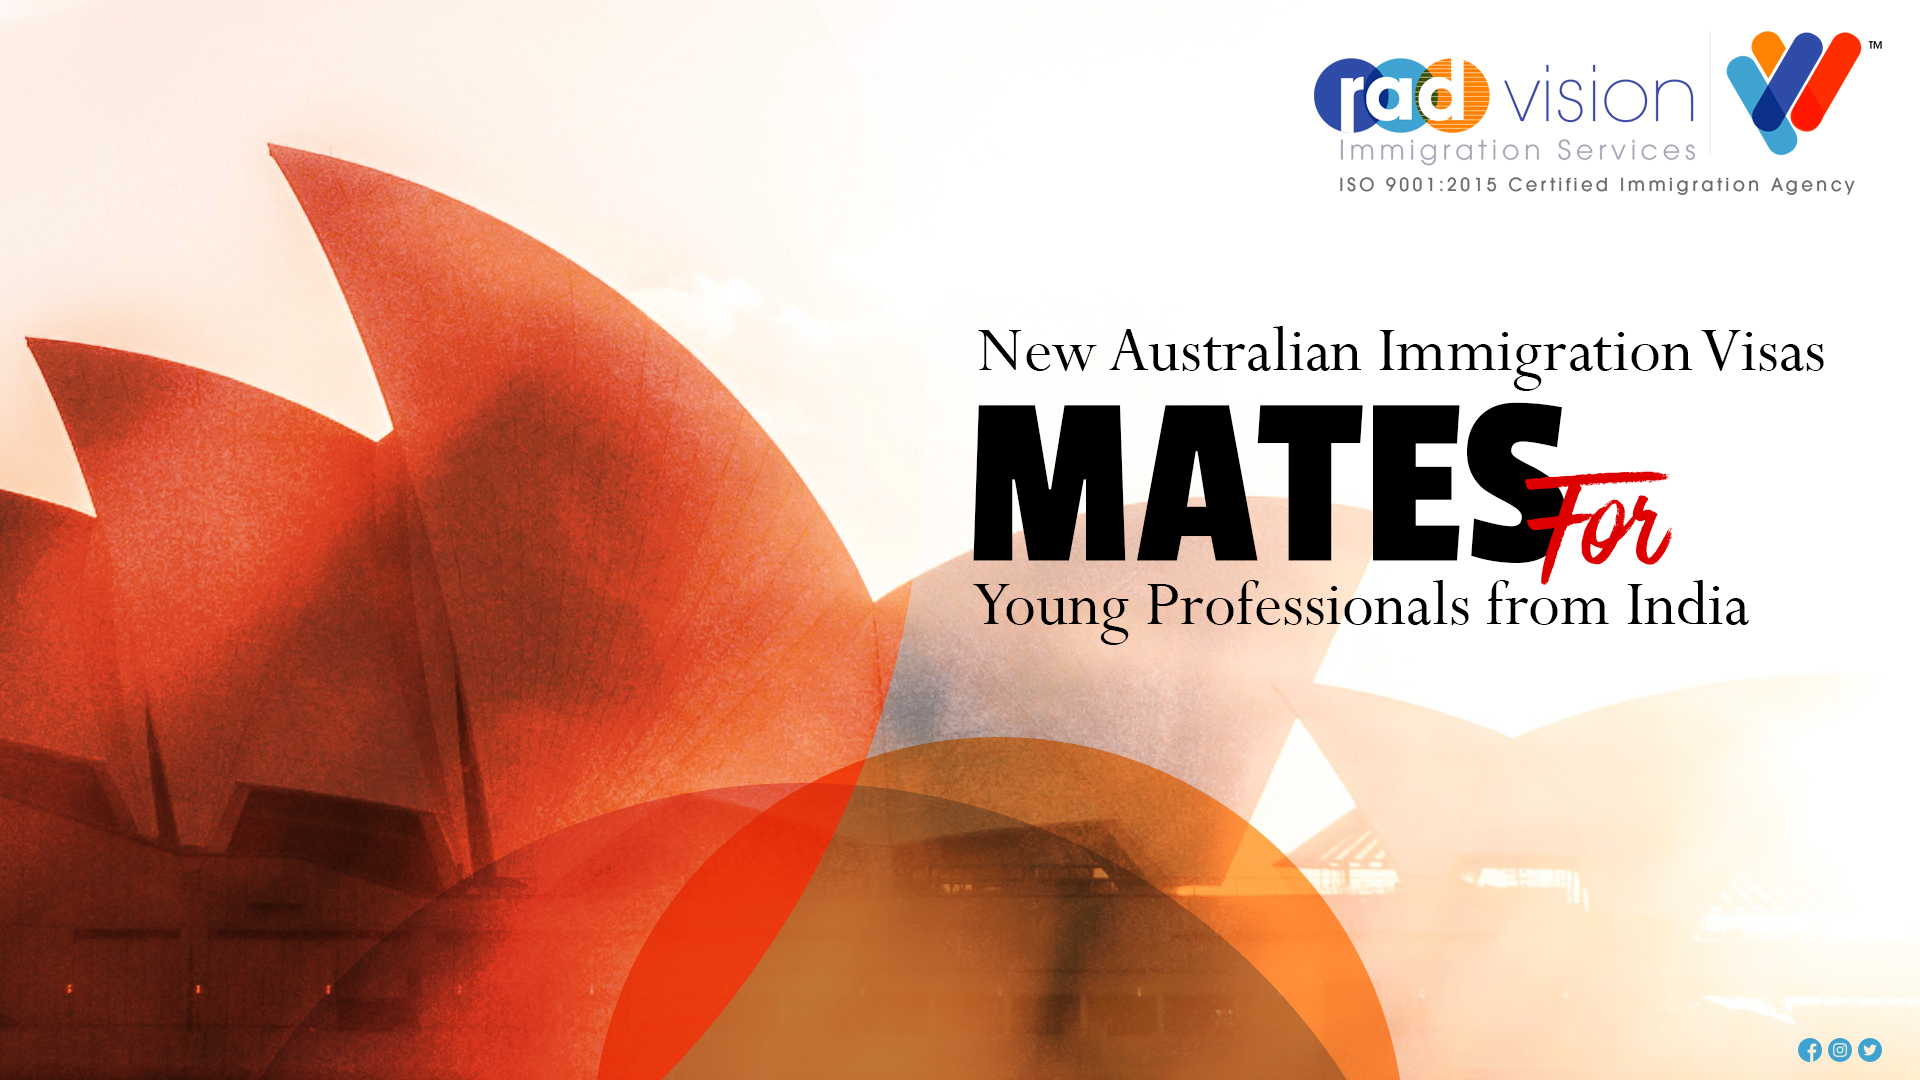 New Australian Immigration Visas Under MATES For Young Professionals from India